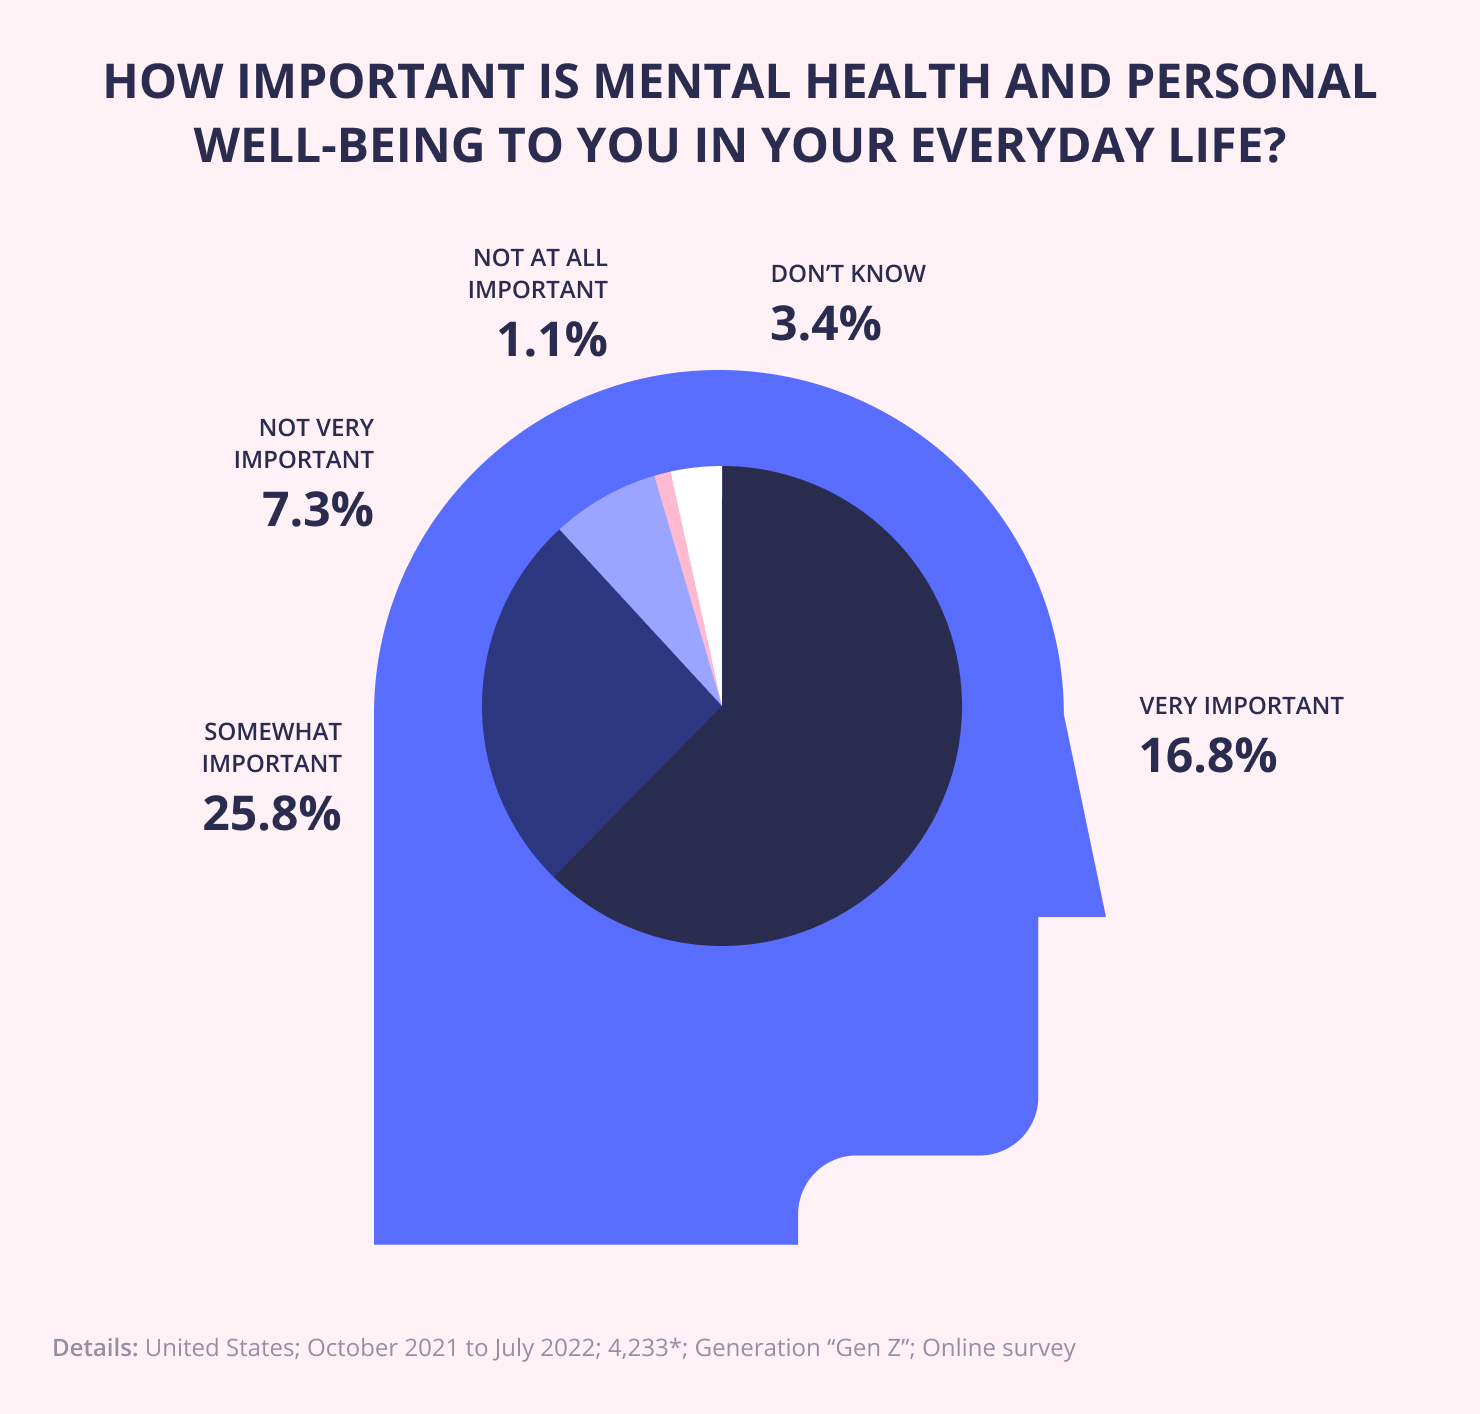 Why Is Mental Health Important?
